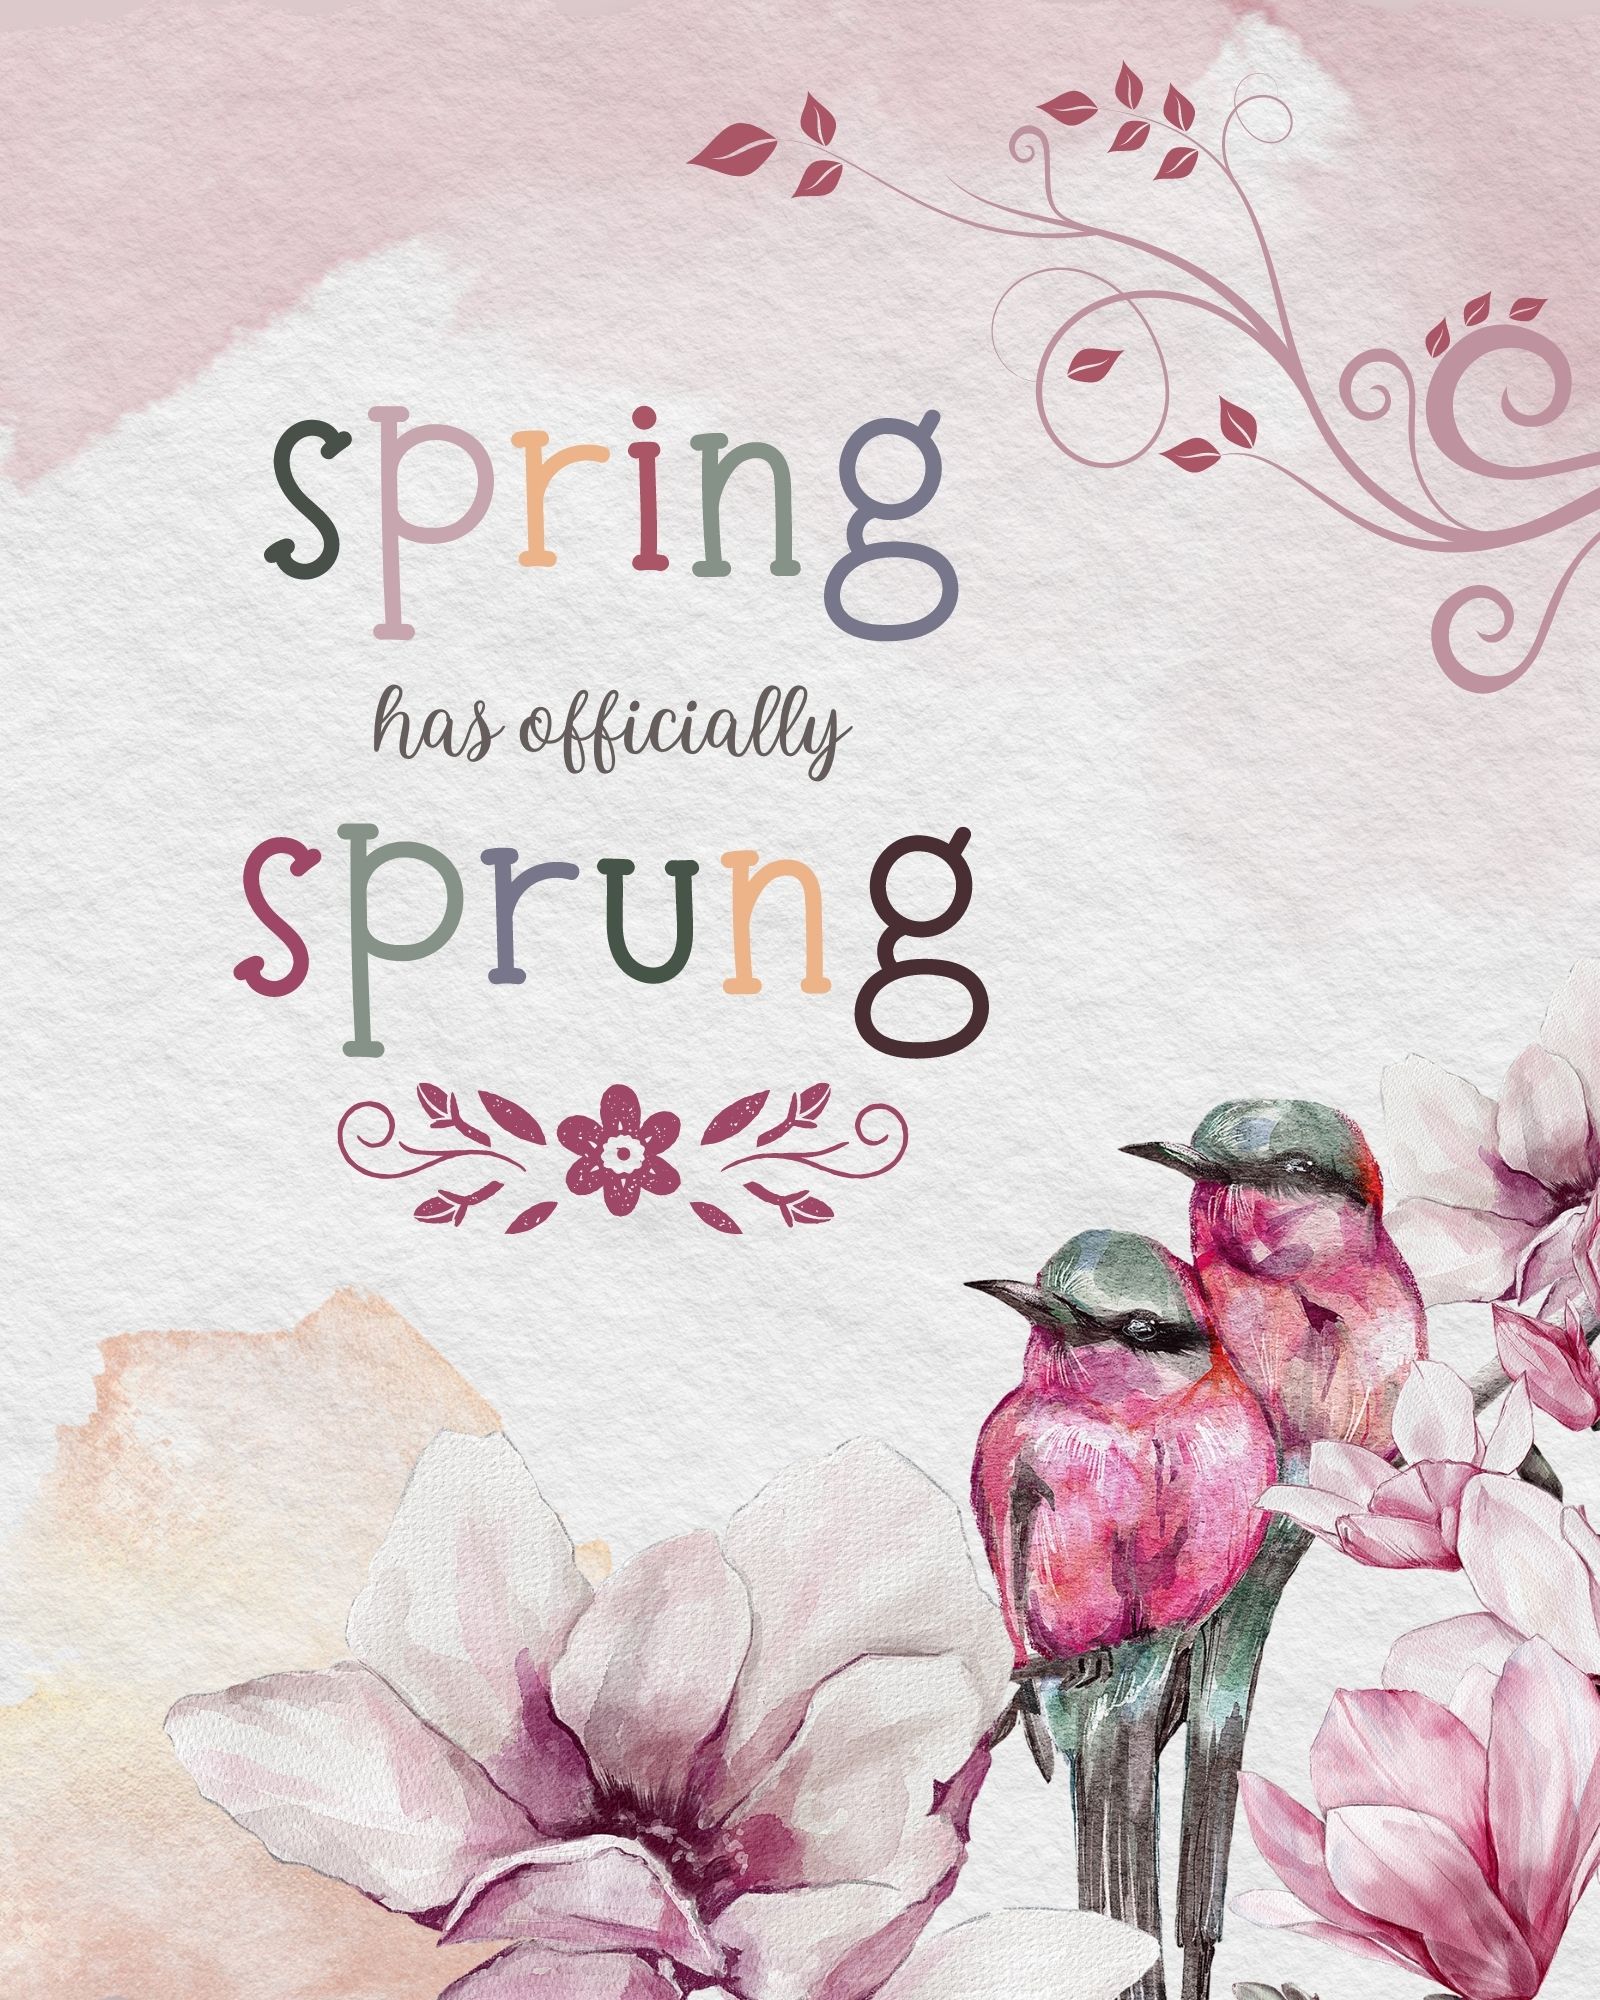 5 Free Printable Spring Flowers and Birds Wall Art